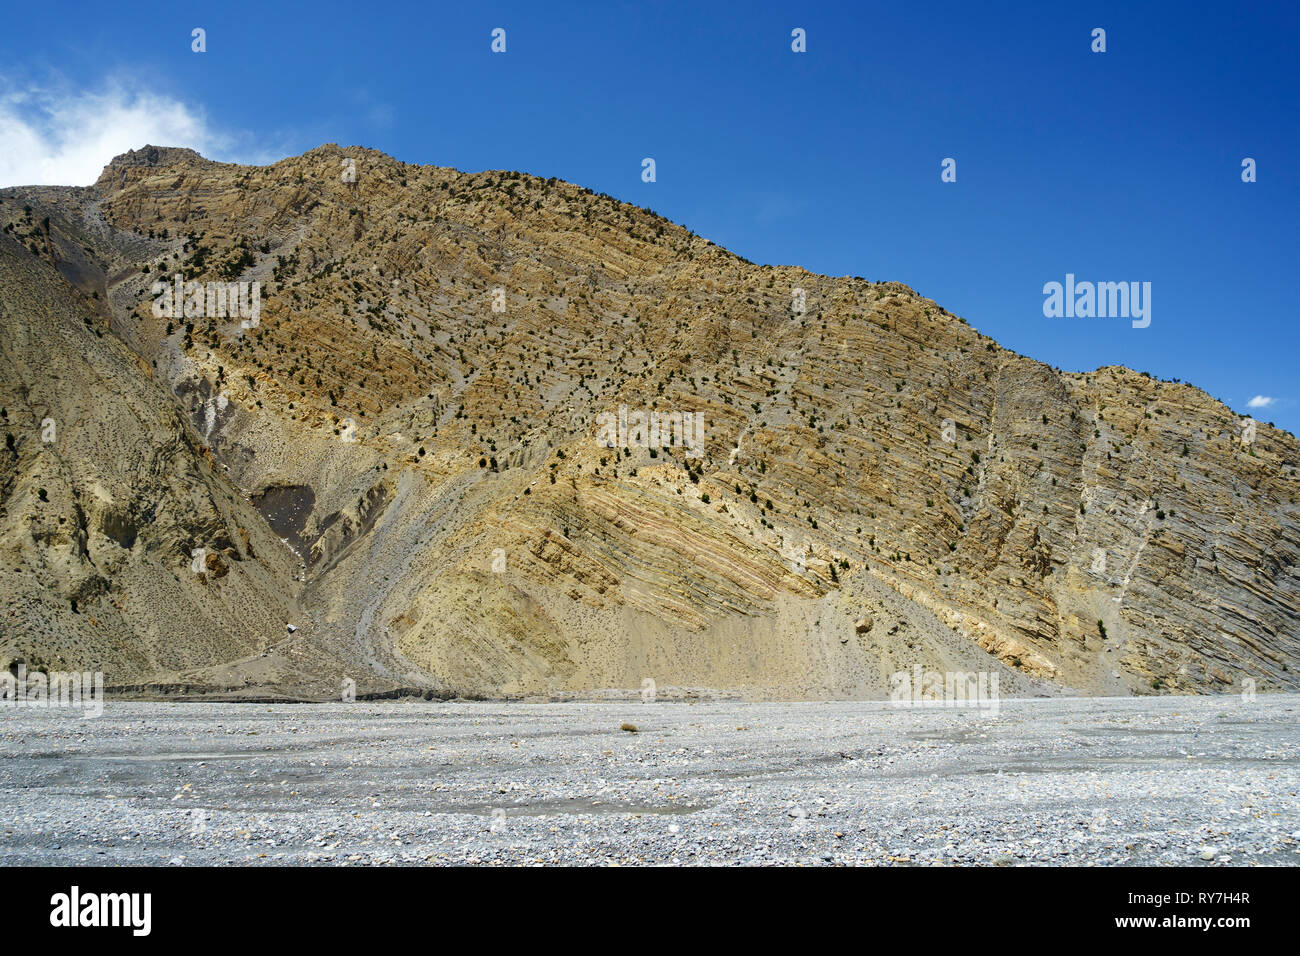 Rocky hill with visible geological stratas overhanging the dry riverbed of the Kali Gandaki between Jomsom and Kagbeni, Upper Mustang region, Nepal. Stock Photo